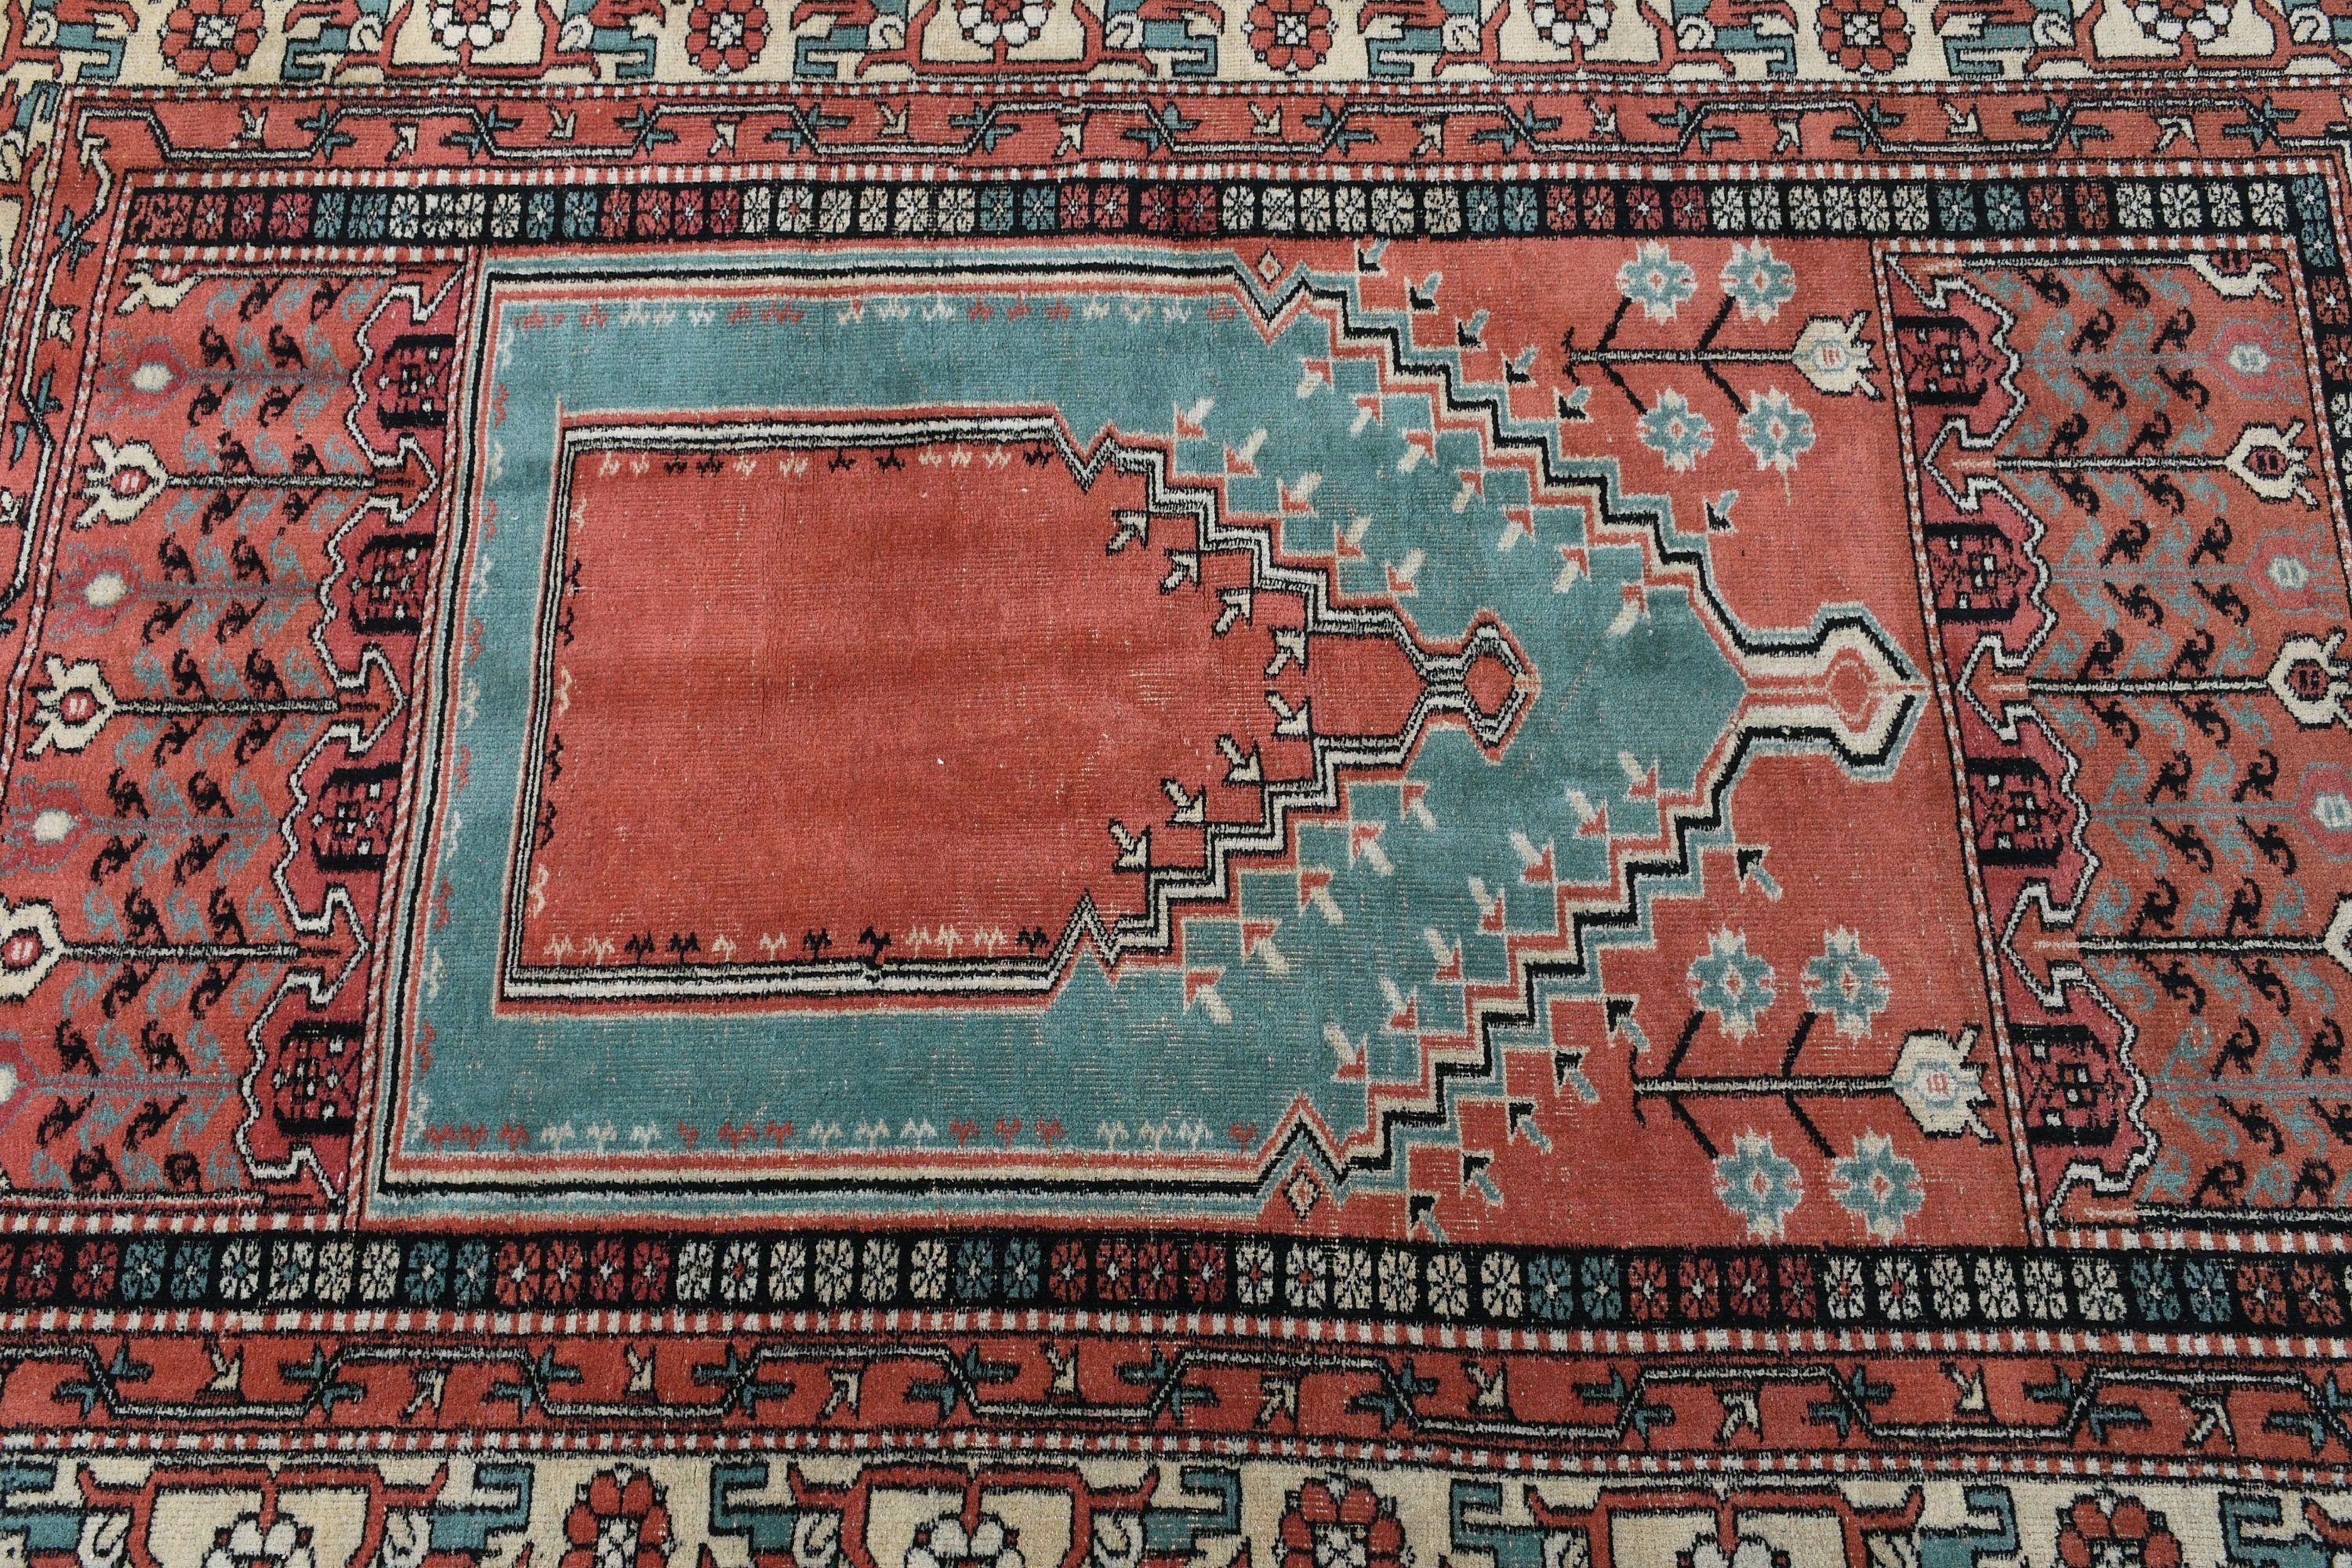 Red Cool Rugs, 4.1x5.5 ft Accent Rug, Kitchen Rugs, Entry Rugs, Turkish Rug, Rugs for Entry, Vintage Rug, Bedroom Rugs, Anatolian Rug